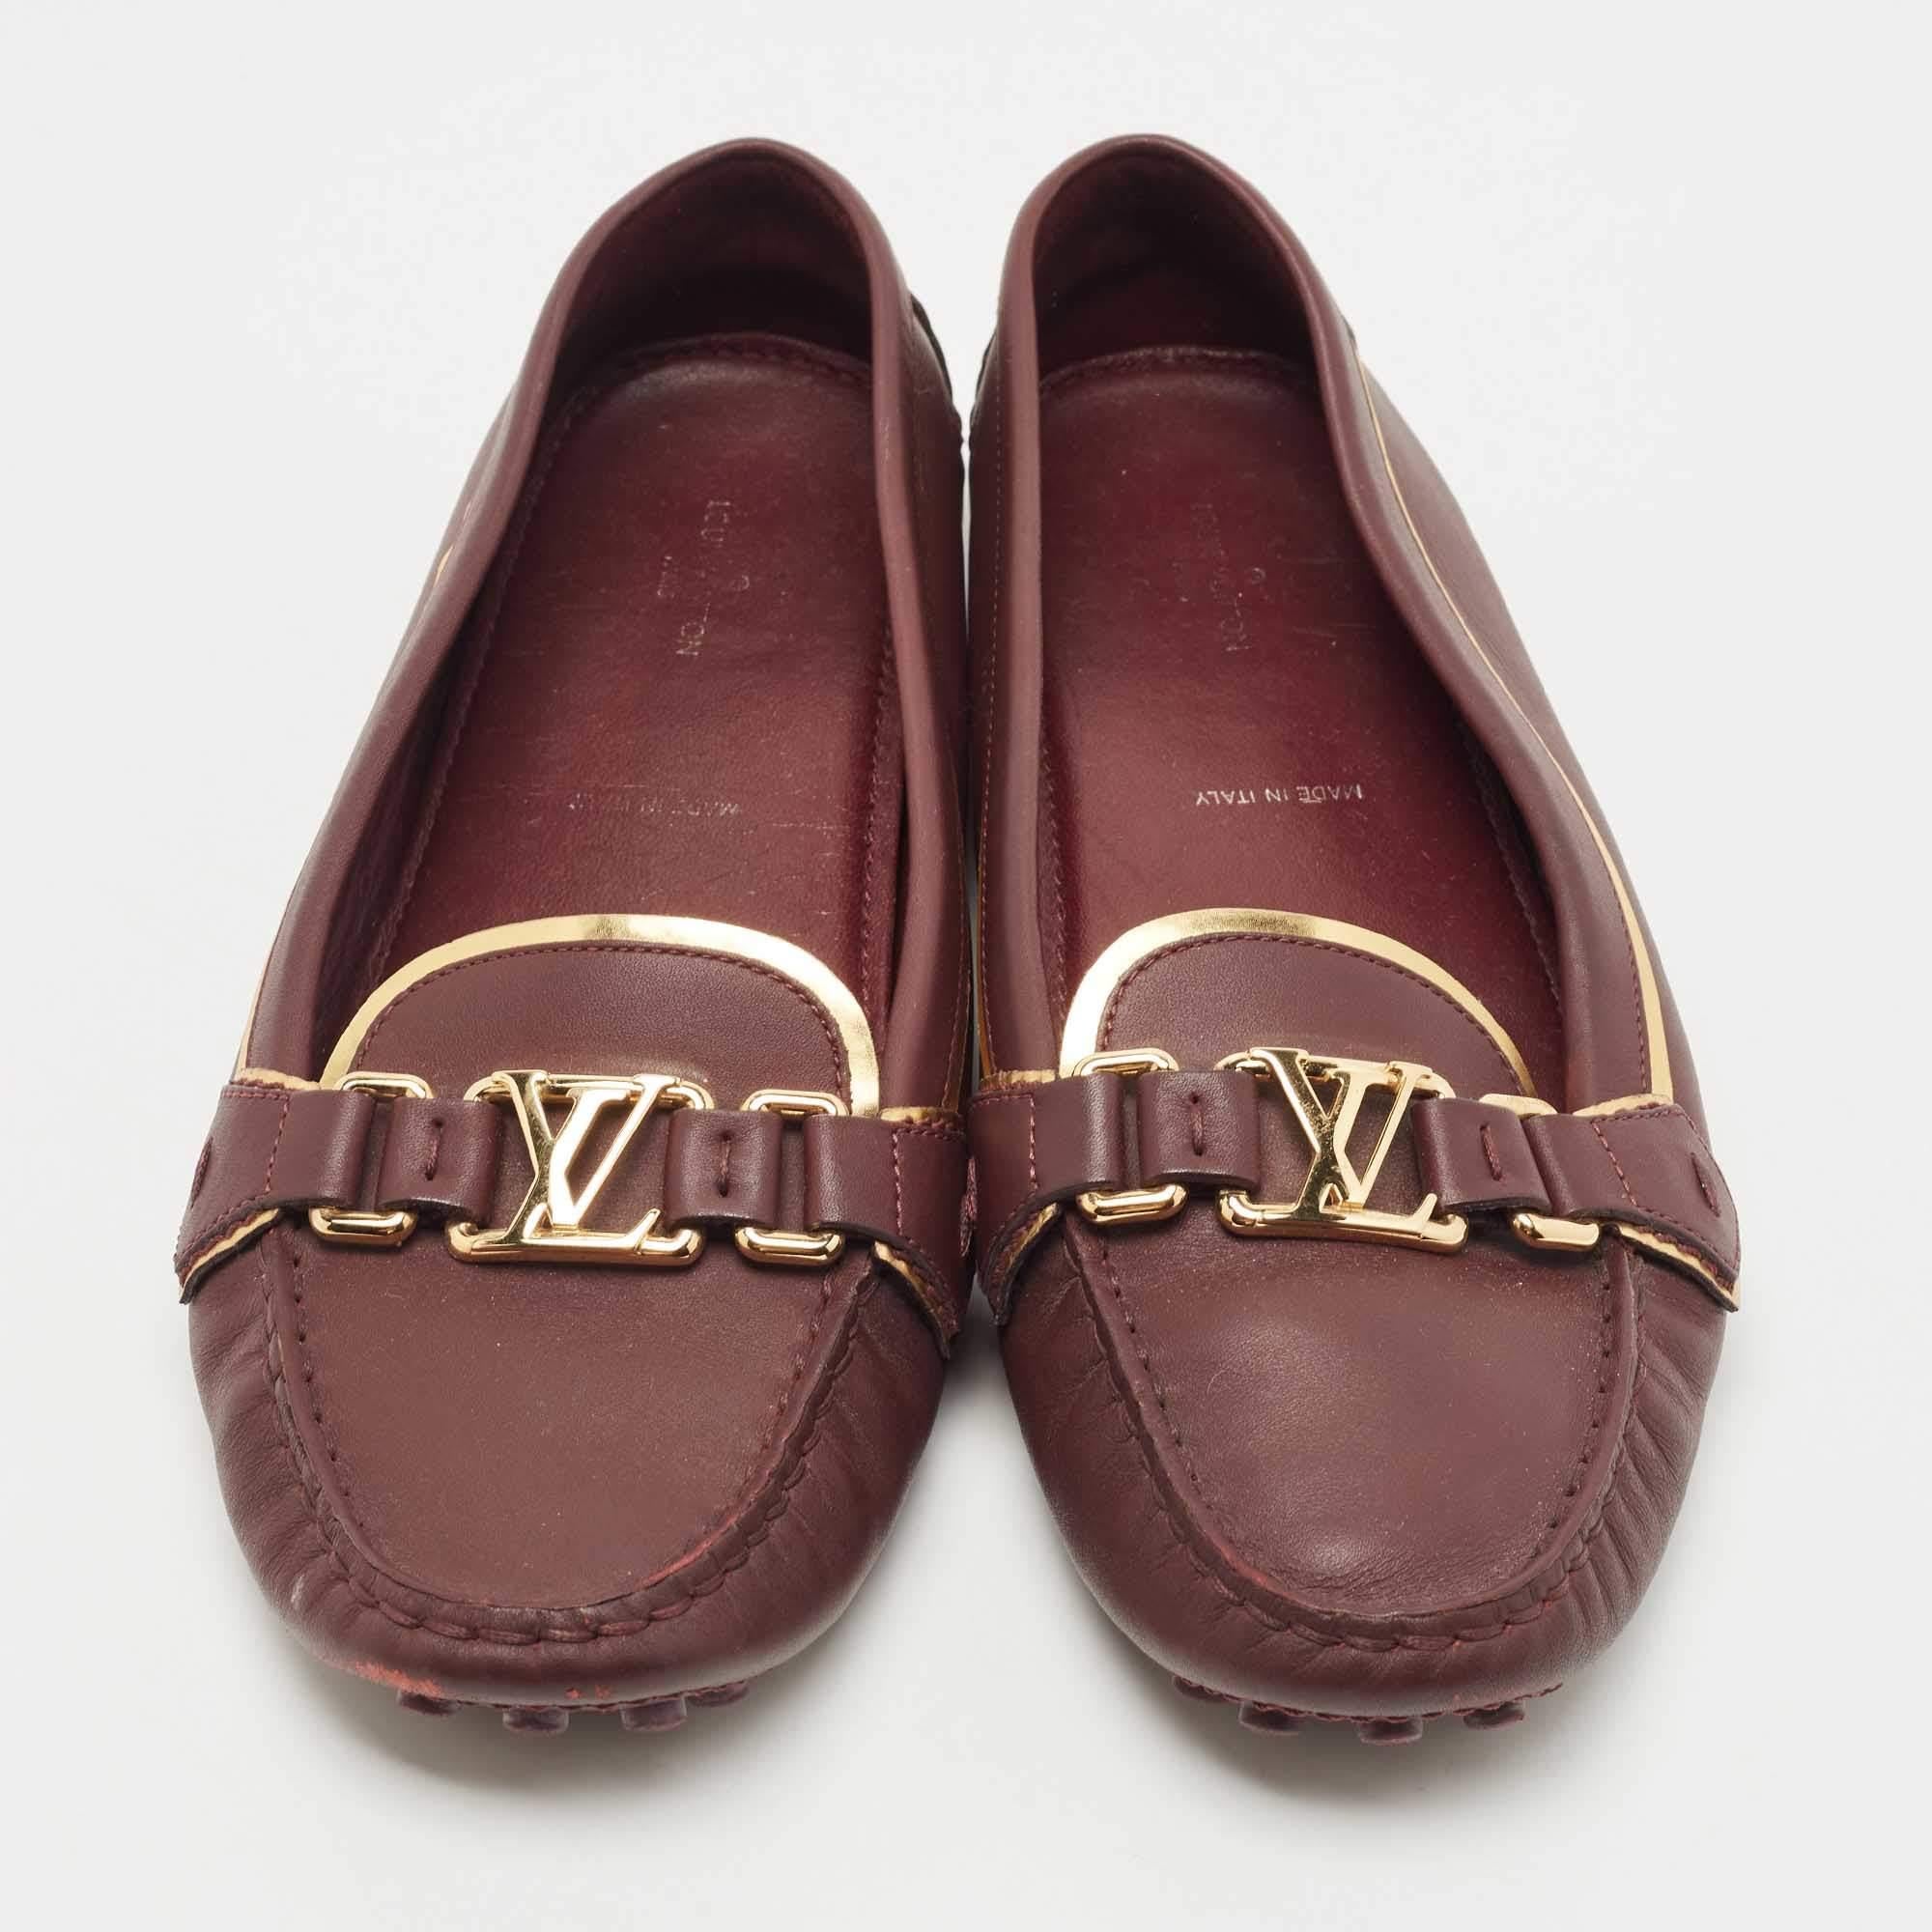 Women's Louis Vuitton Burgundy/Gold Leather Oxford Loafers Size 41